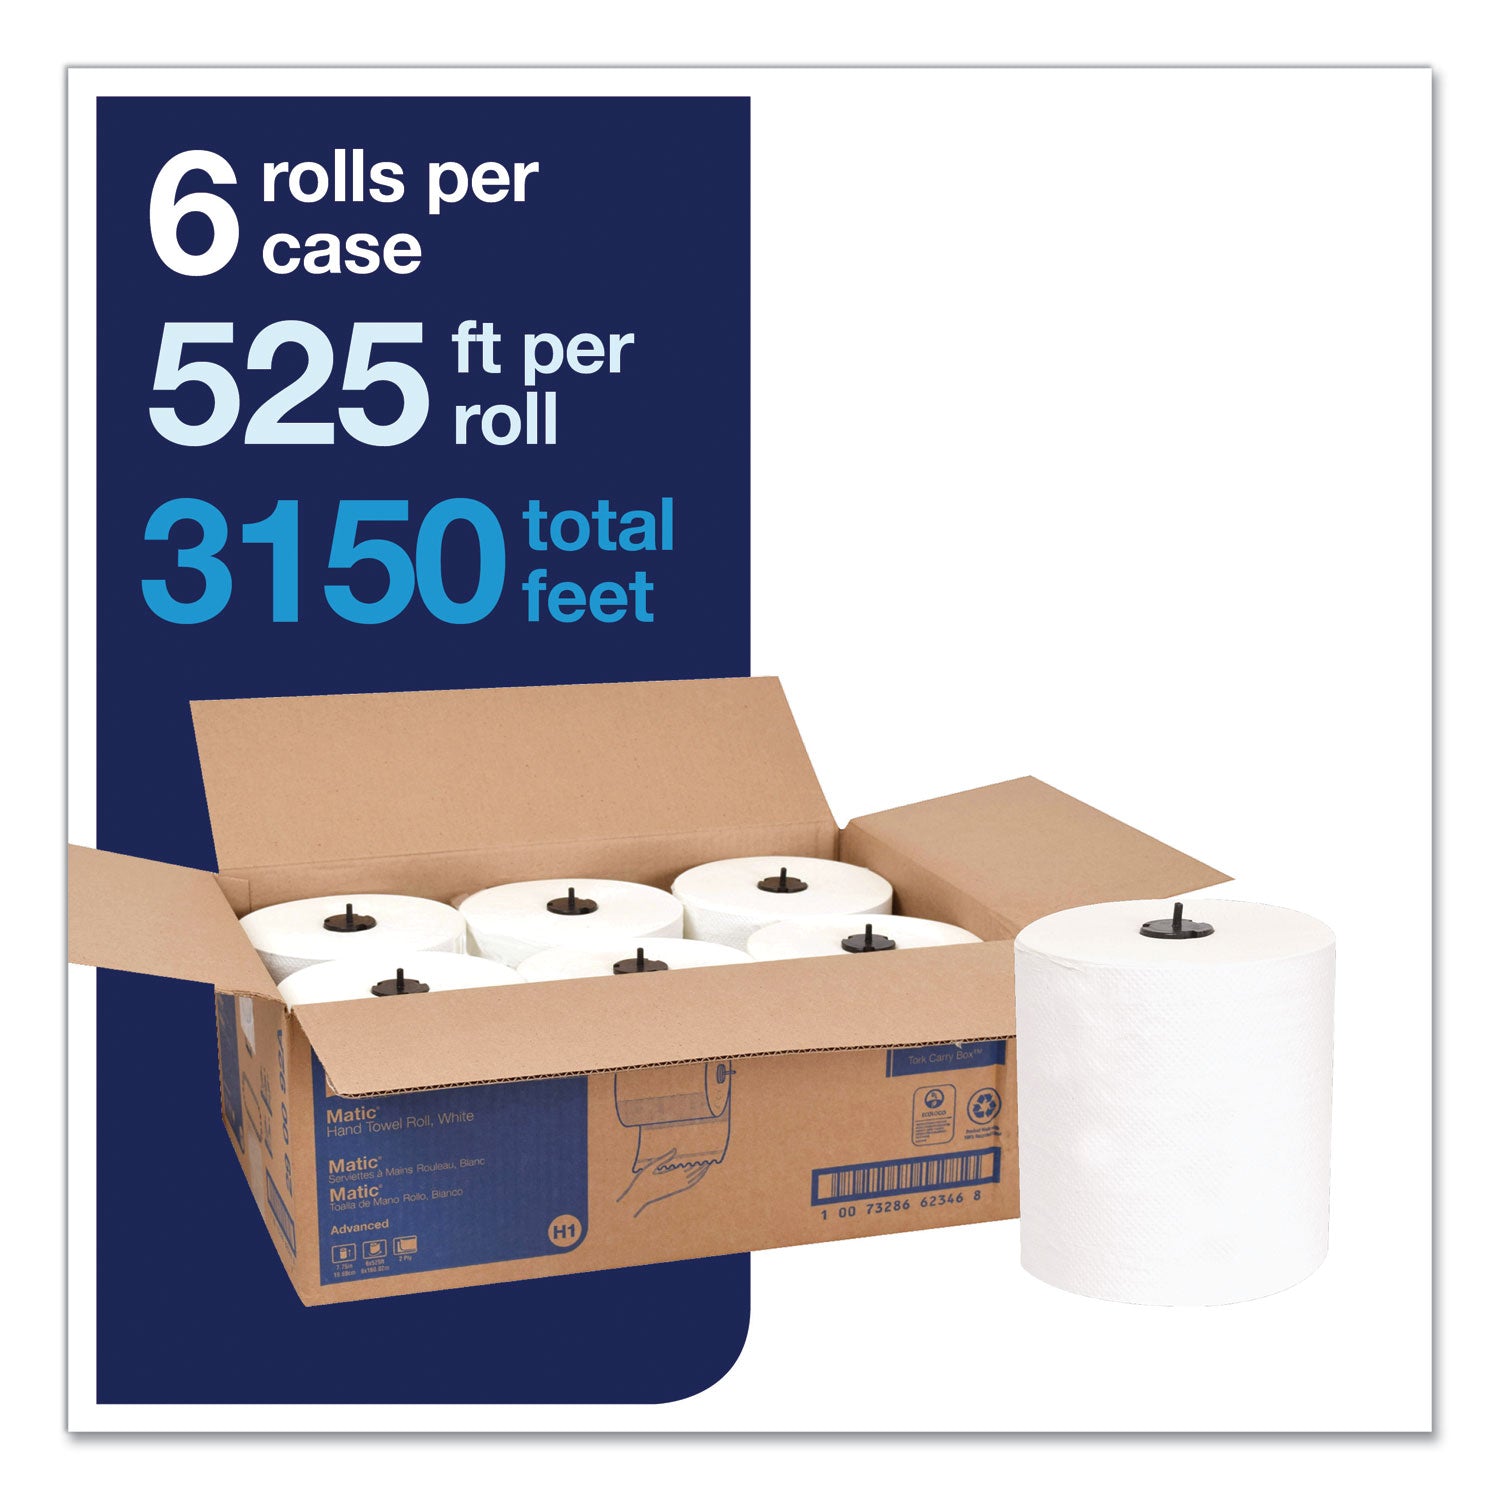 advanced-matic-hand-towel-roll-2-ply-77-x-525-ft-white-643-roll-6-rolls-carton_trk290092a - 3